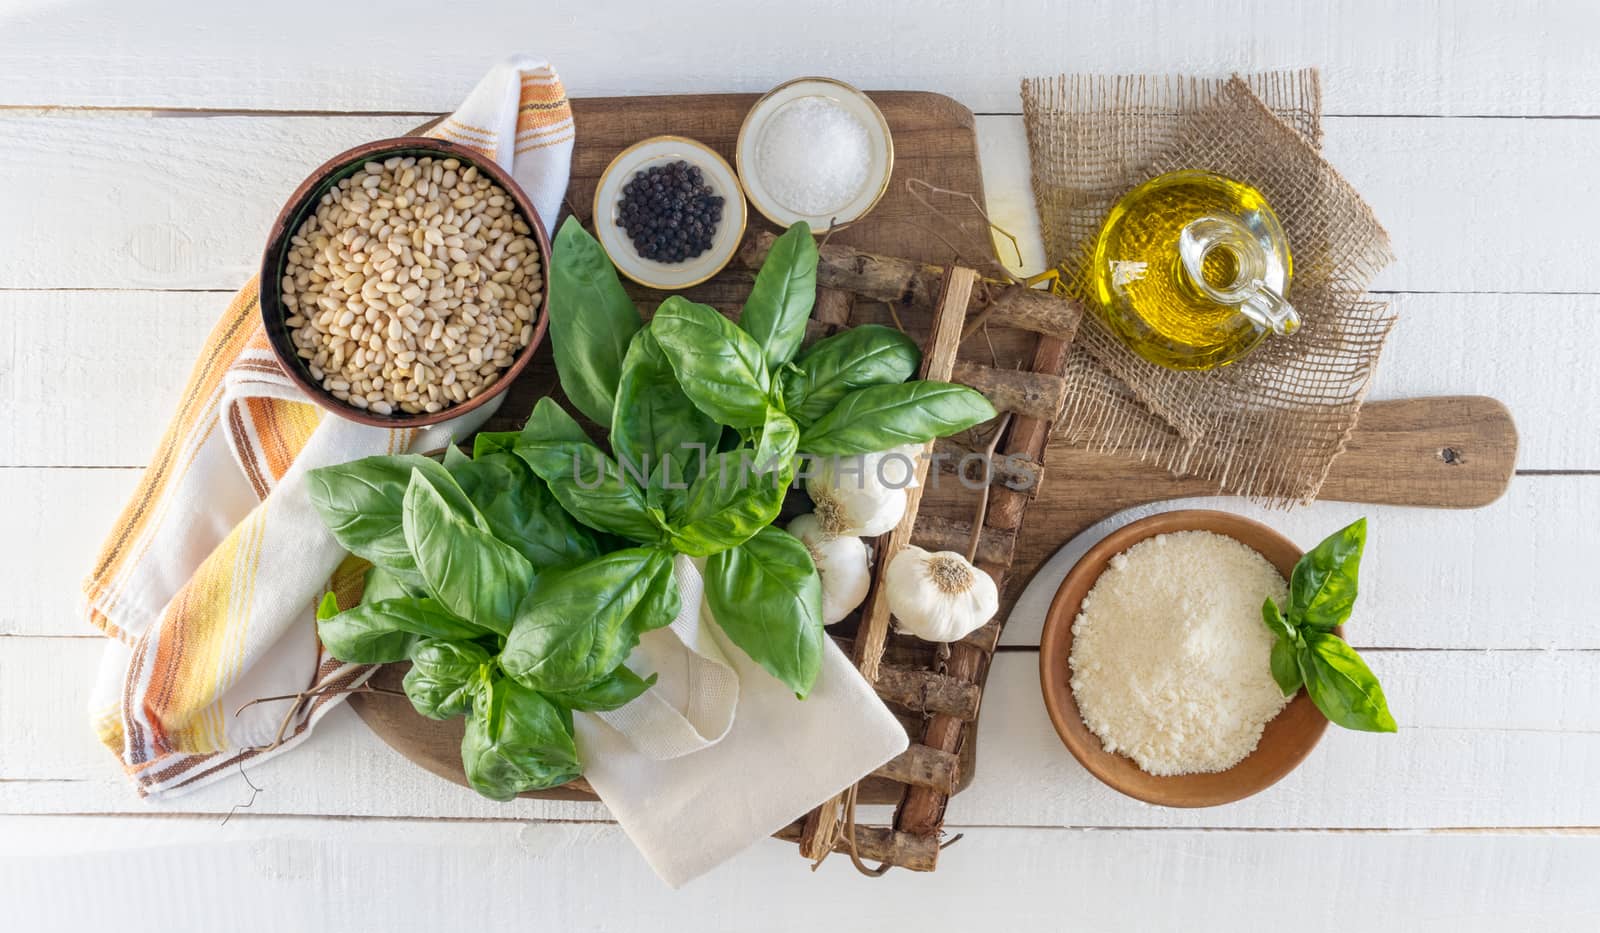 Fresh pesto ingredients, including basil, garlic, pine nuts, olive oil, Parmesan cheese, salt, and pepper on rustic boards







Fresh pesto ingredients, including